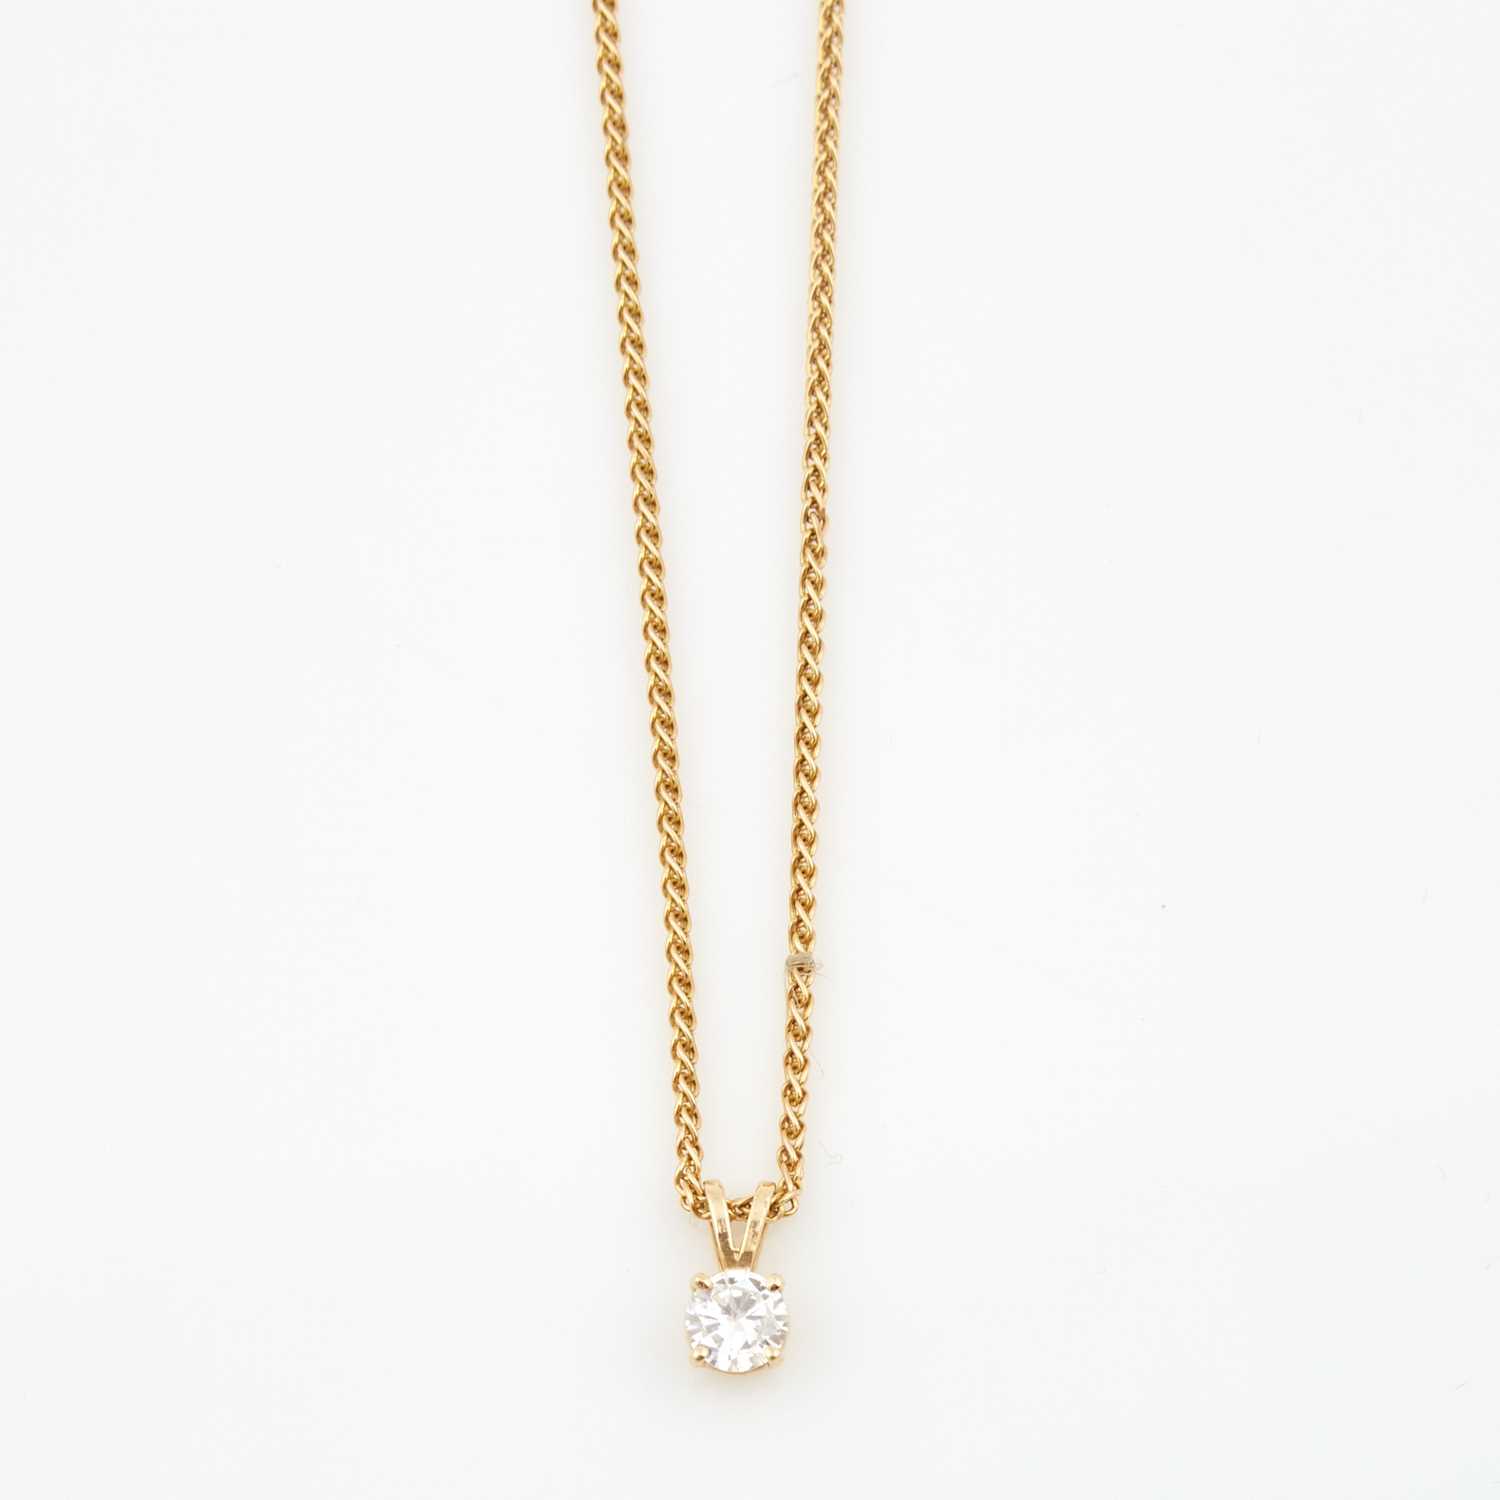 Lot 97 - Diamond Solitaire Pendant about 0.50 ct. and Gold Neck Chain, 14K 3 dwt.